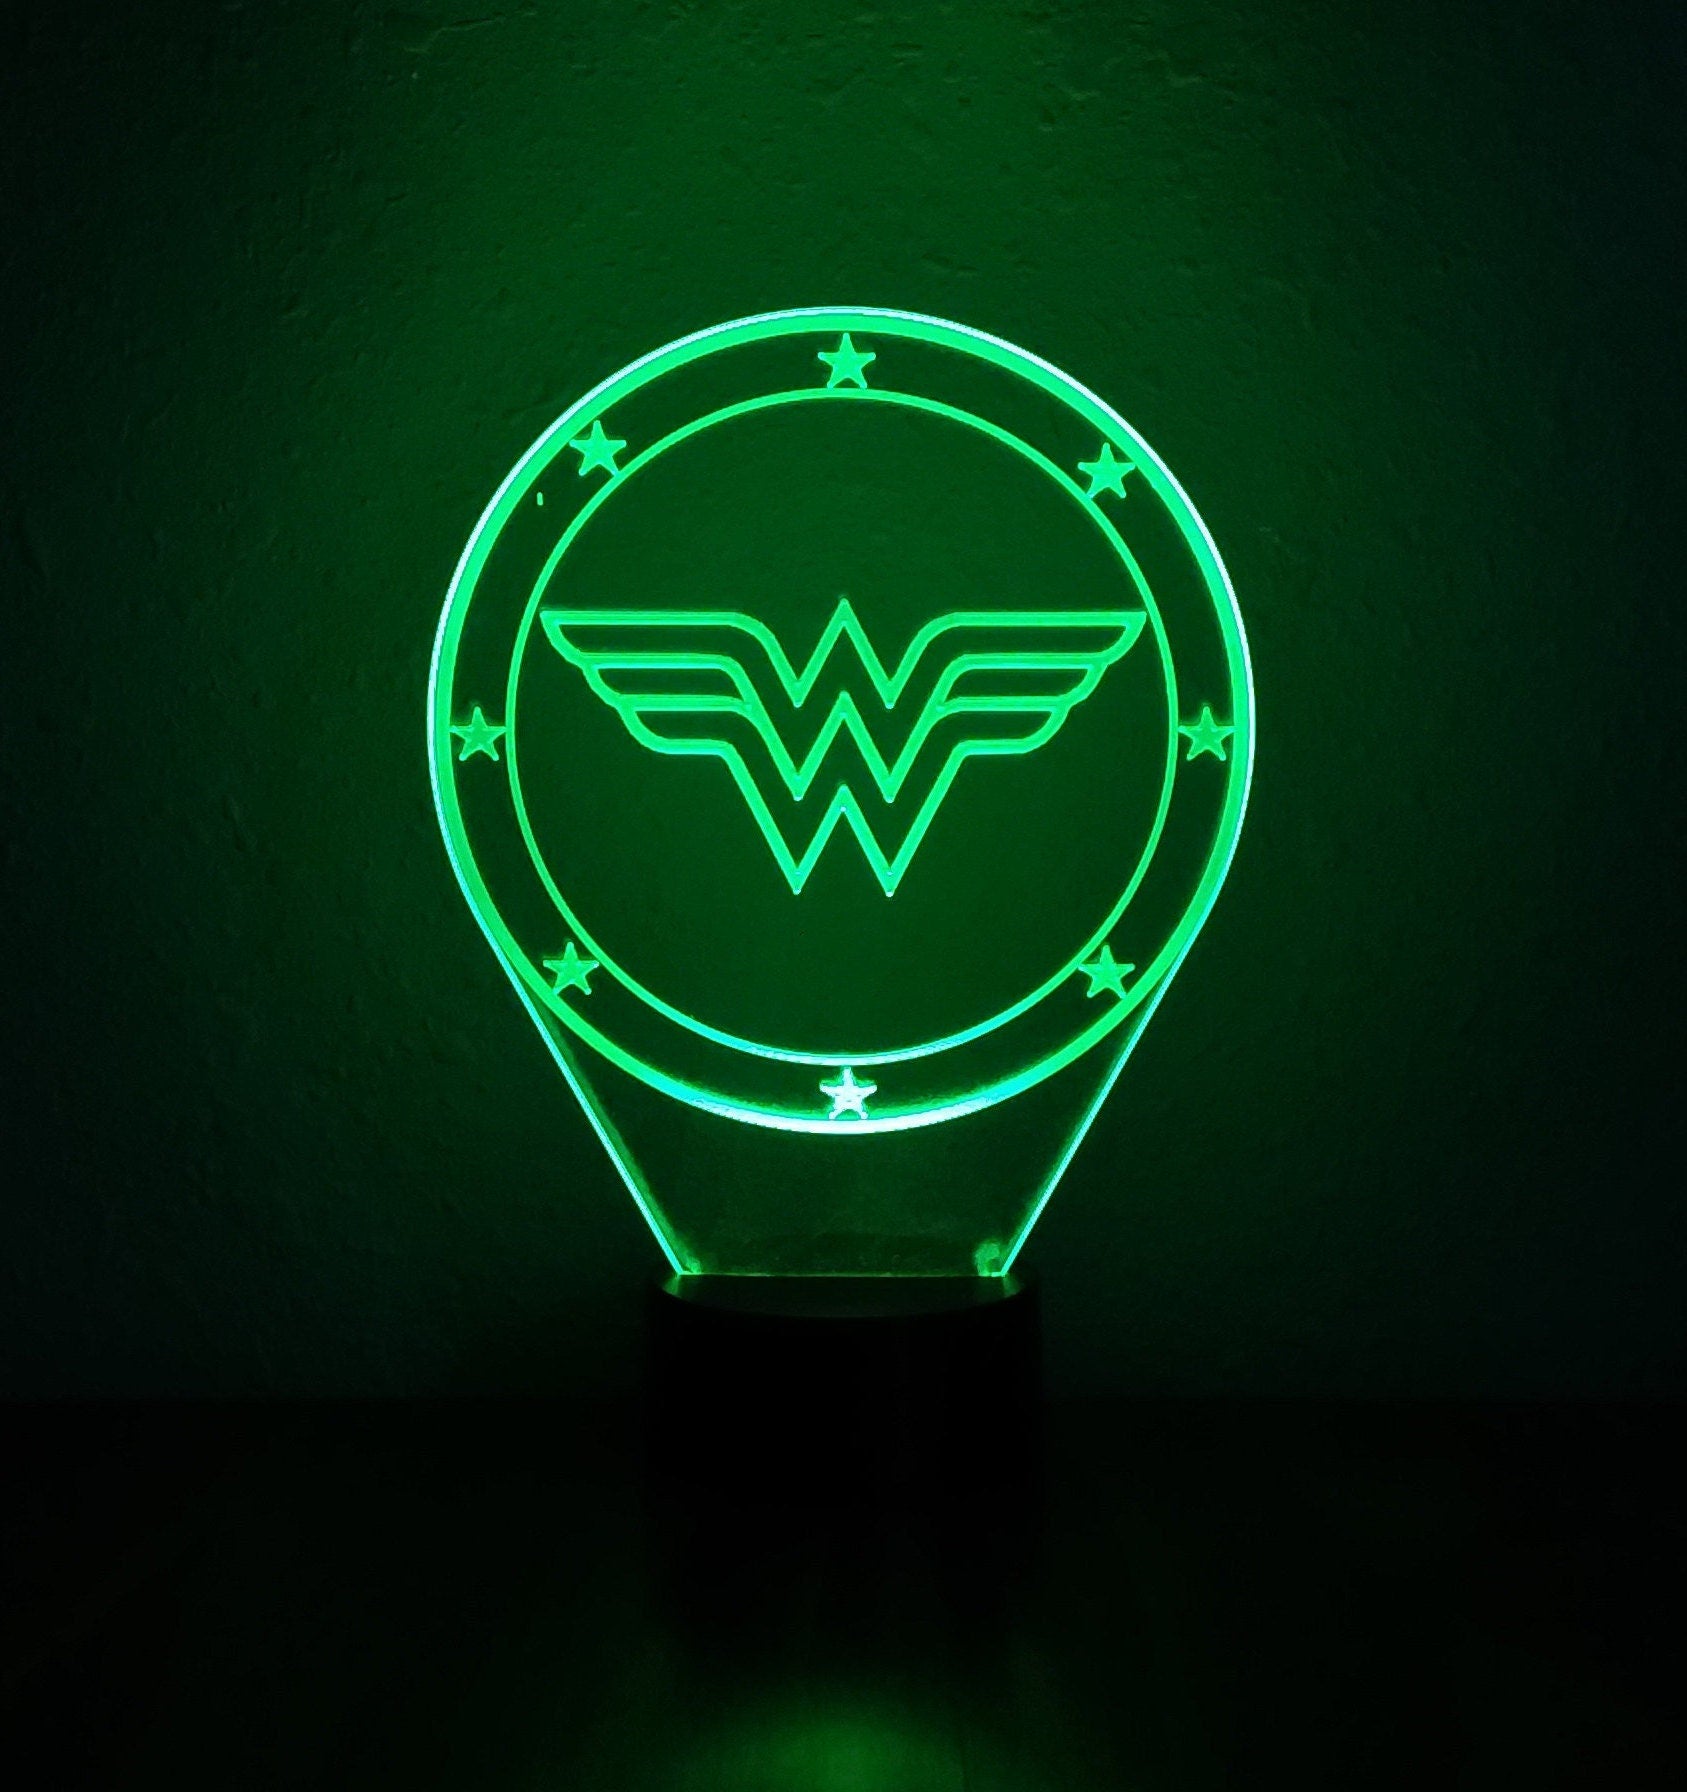 Awesome "Wonder Woman" 3D LED Lamp (1255) - FREE SHIPPING!